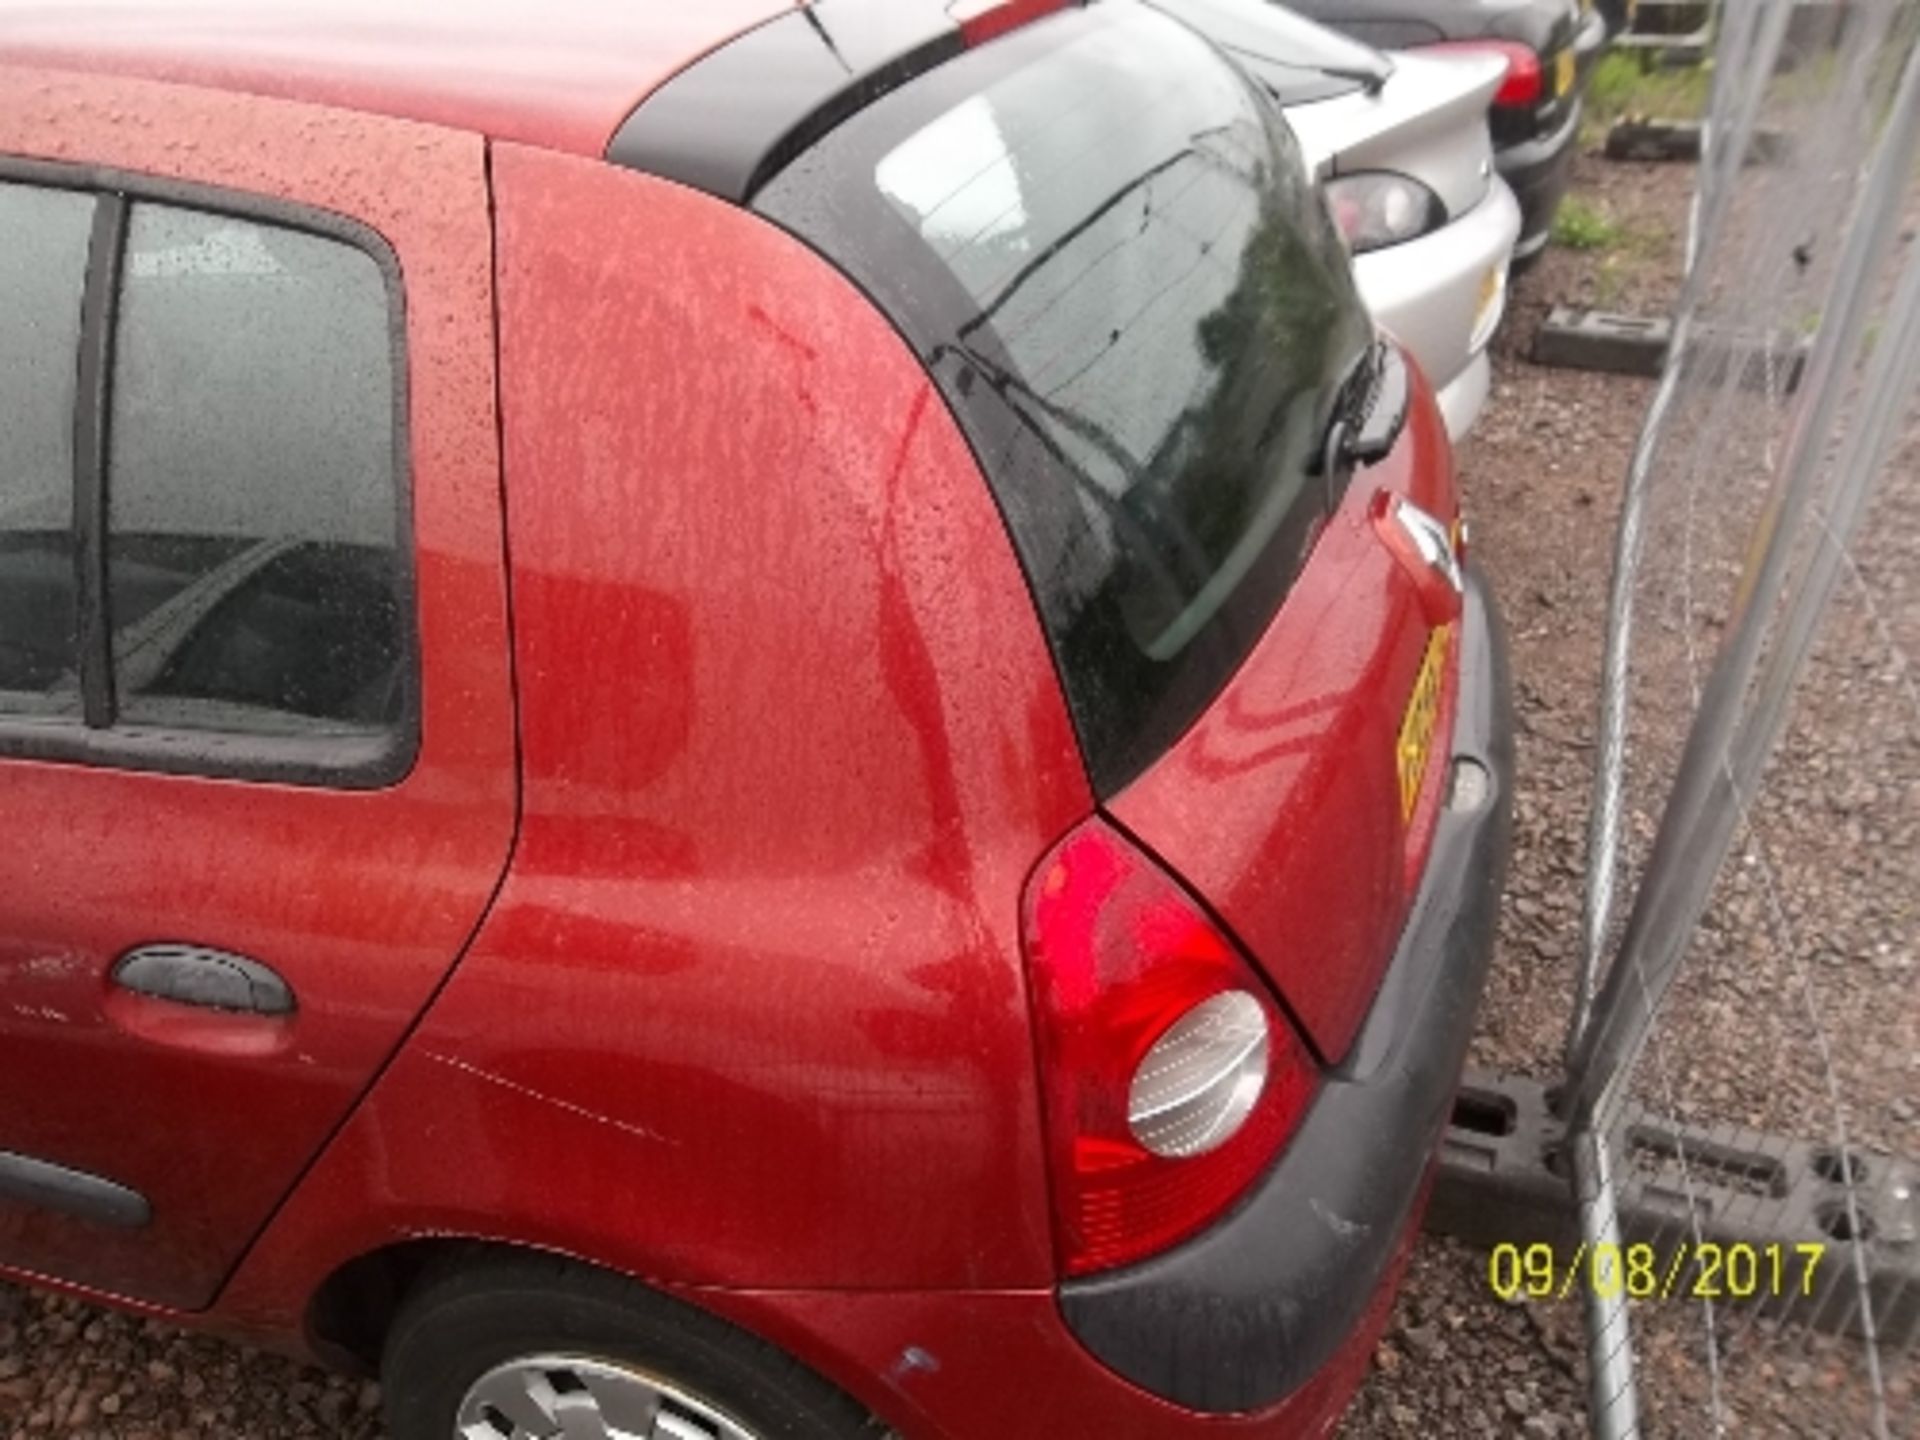 Renault Clio Expression 16V - VO54 GFA Date of registration: 29.09.2004 1390cc, petrol, 4 speed - Image 3 of 4